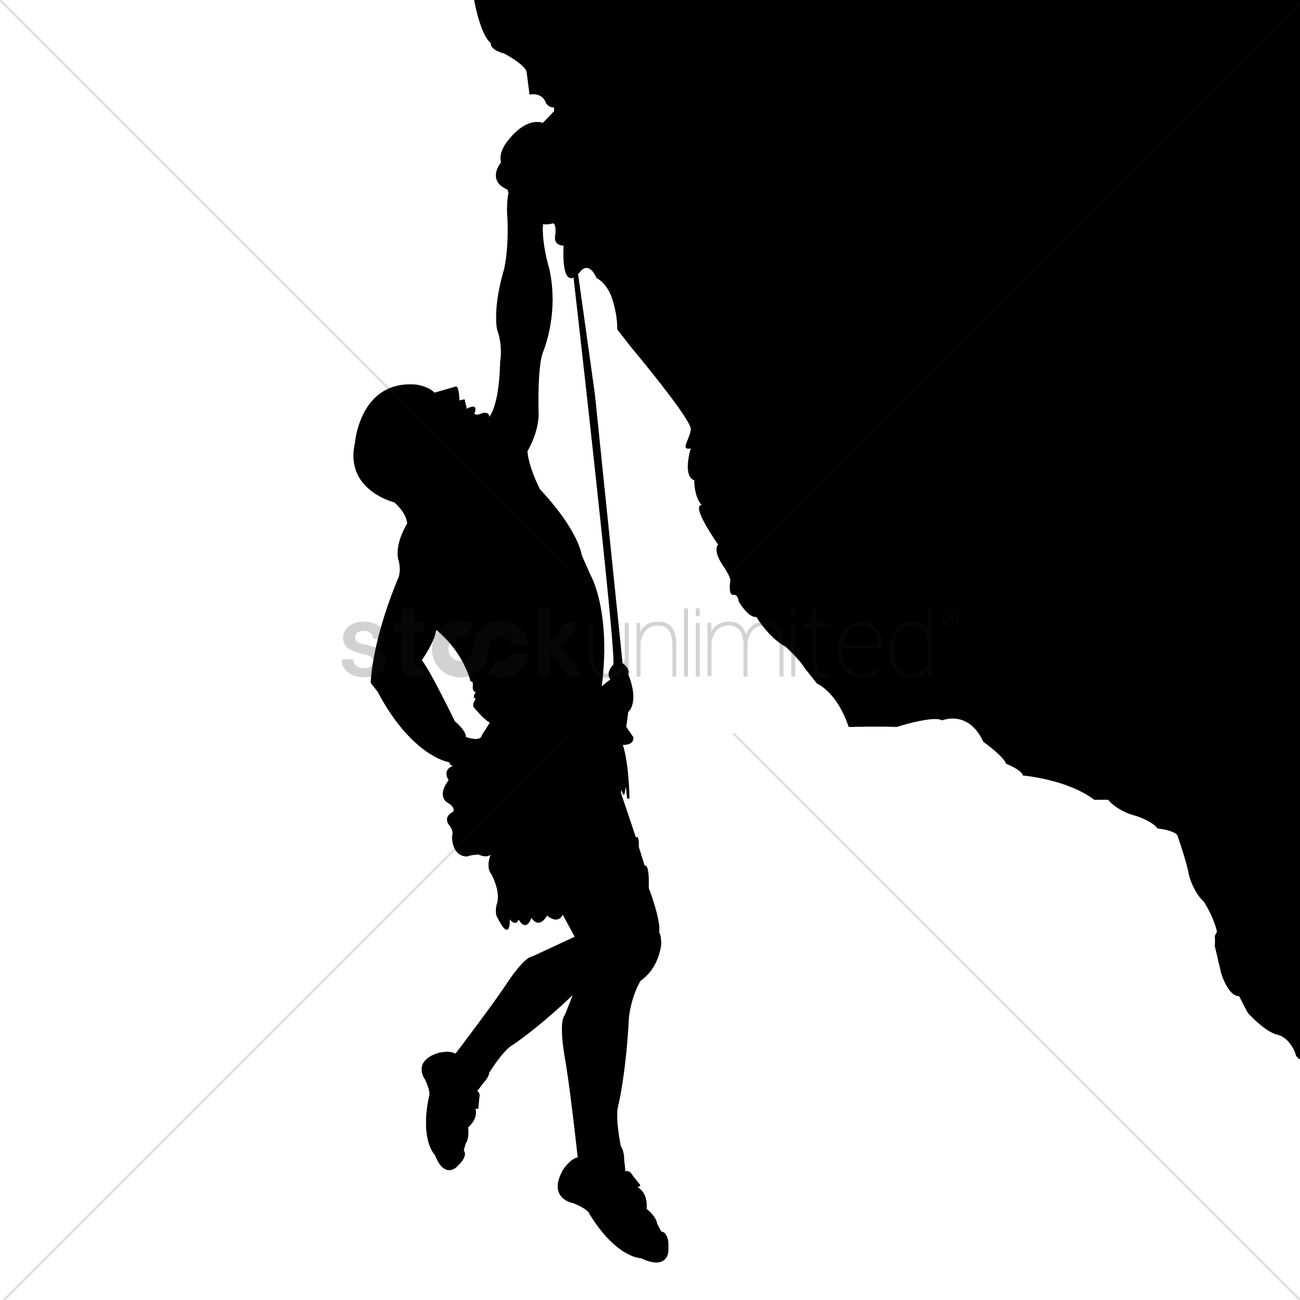 Hiker clipart ice climbing. Mountain hiking free download